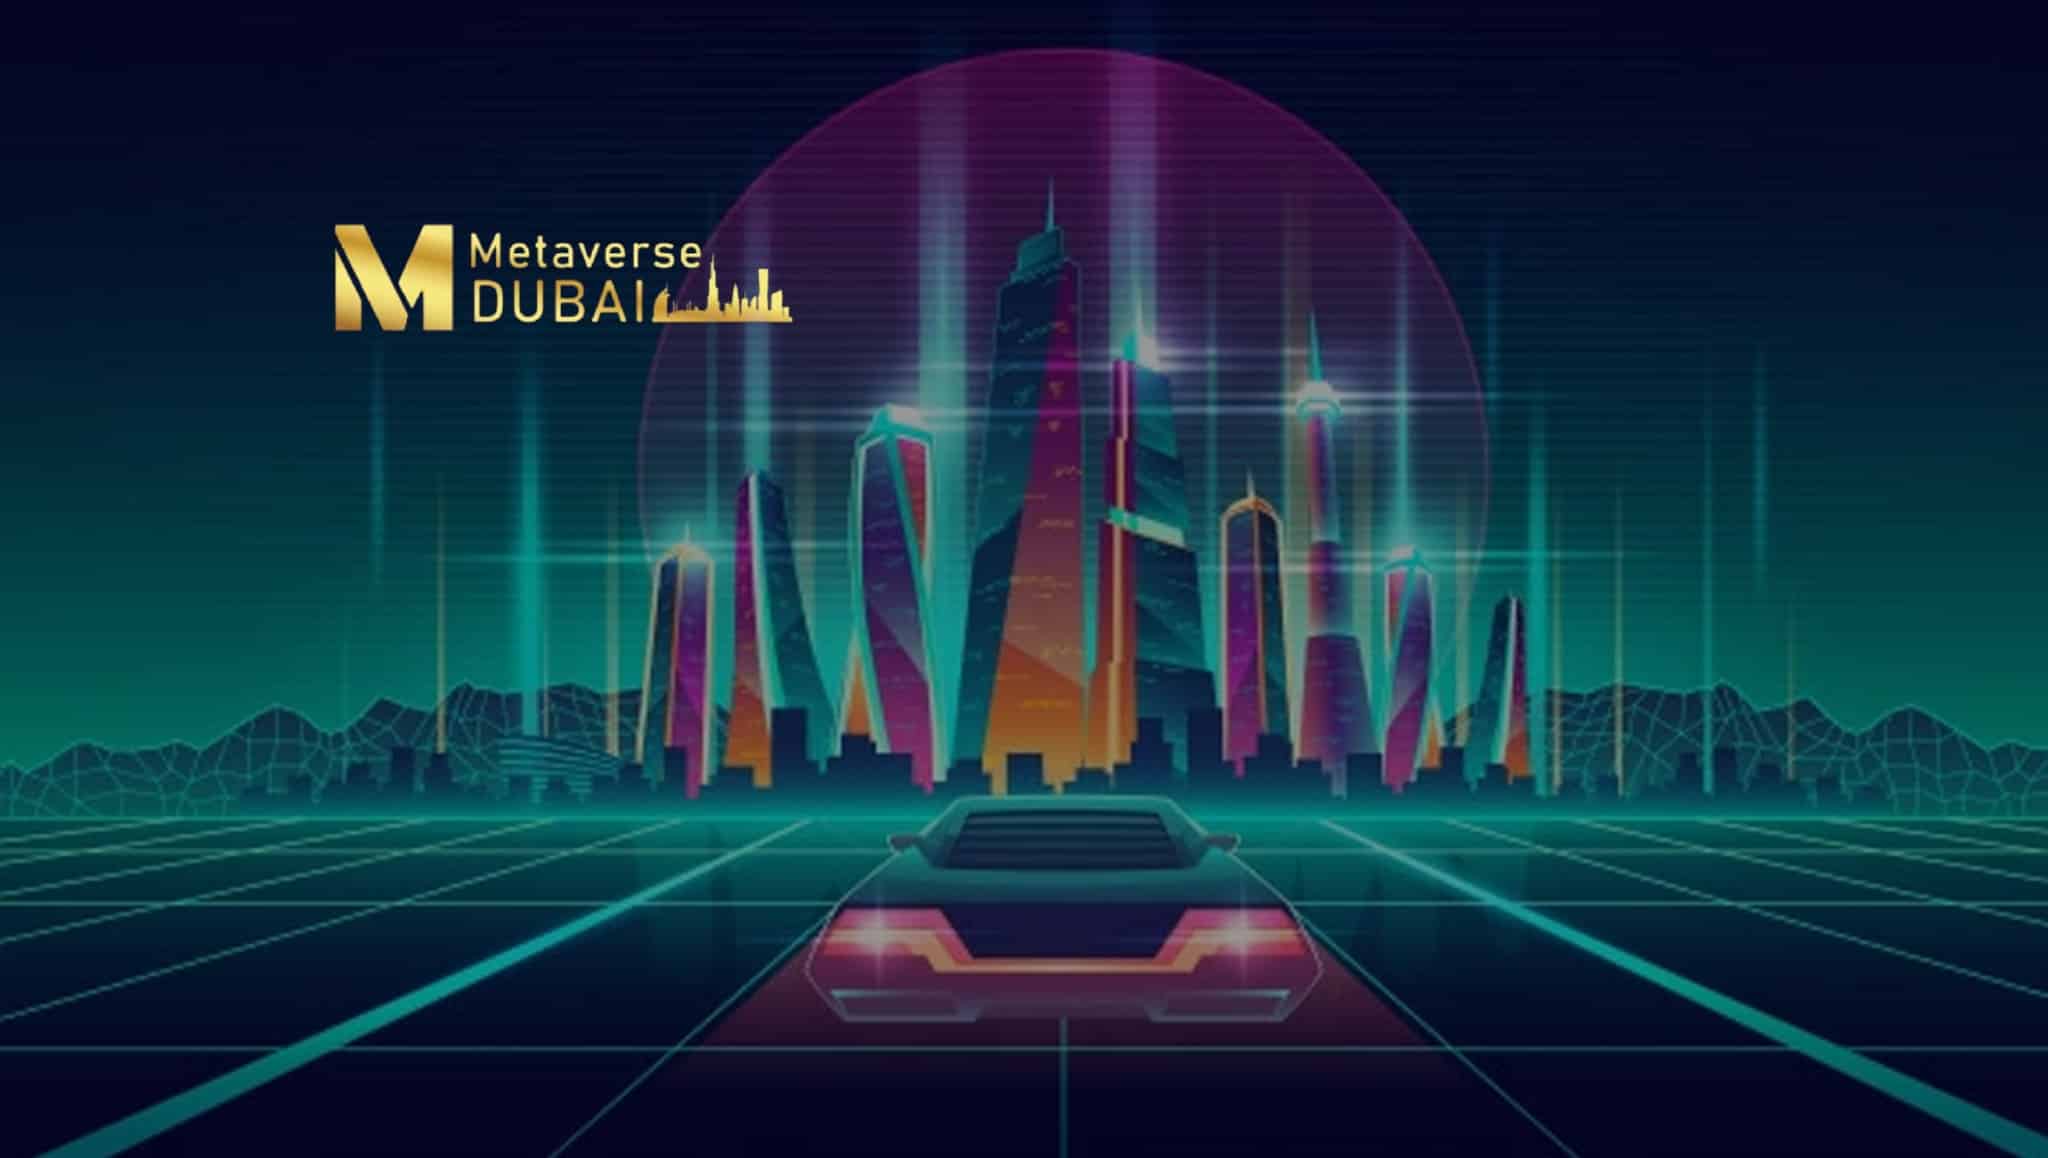 Dubai is betting on metaverse technology for the future